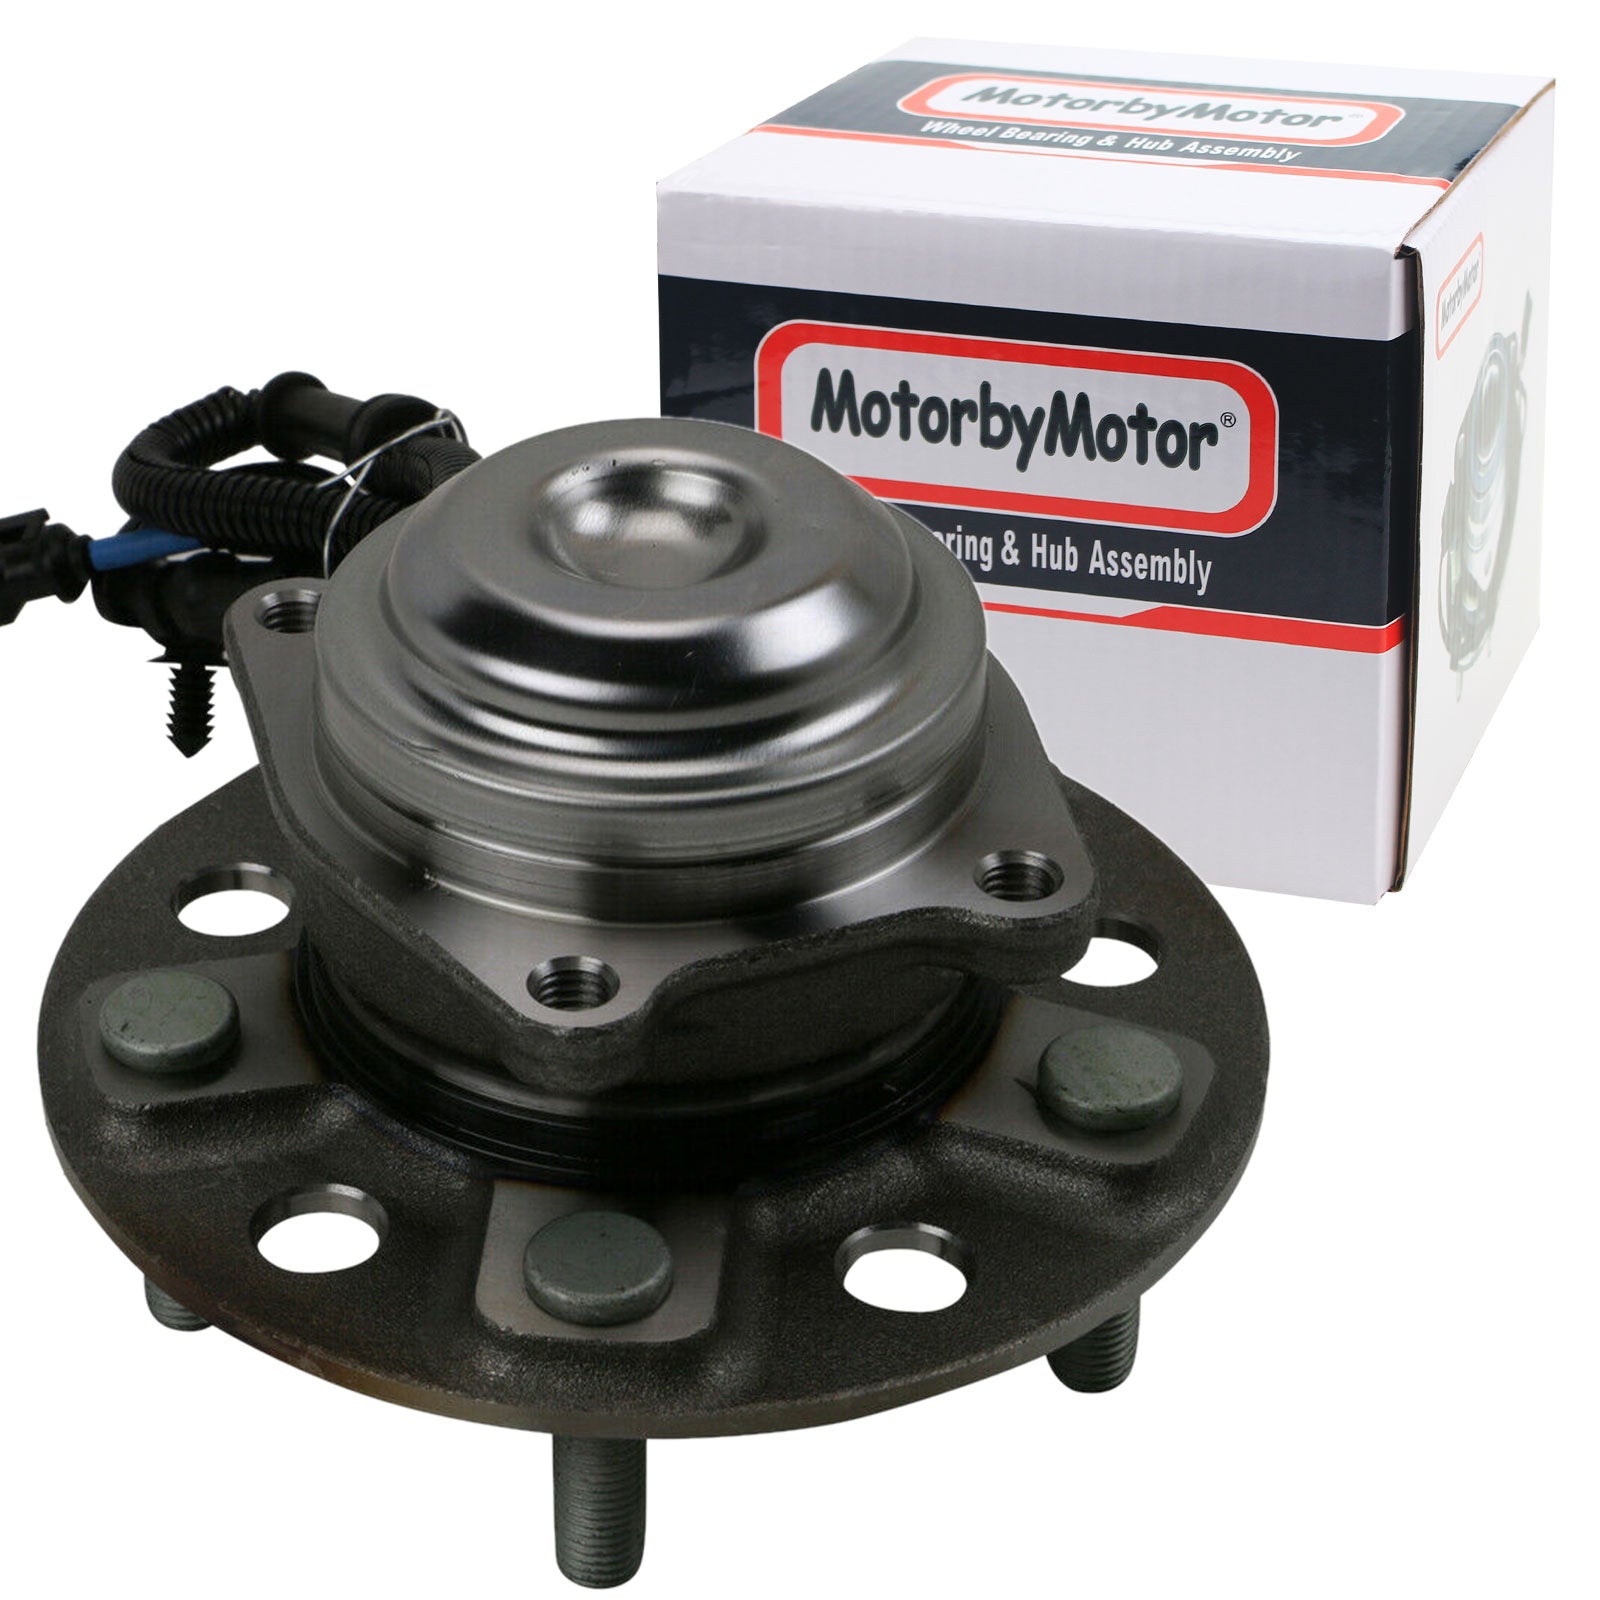 MotorbyMotor 512595 Rear Wheel Bearing and Hub Assembly with 5 Lugs Fits for 2017 Chrysler Pacifica Low-Runout OE Directly Replacement Hub Bearing (w/ABS) MotorbyMotor